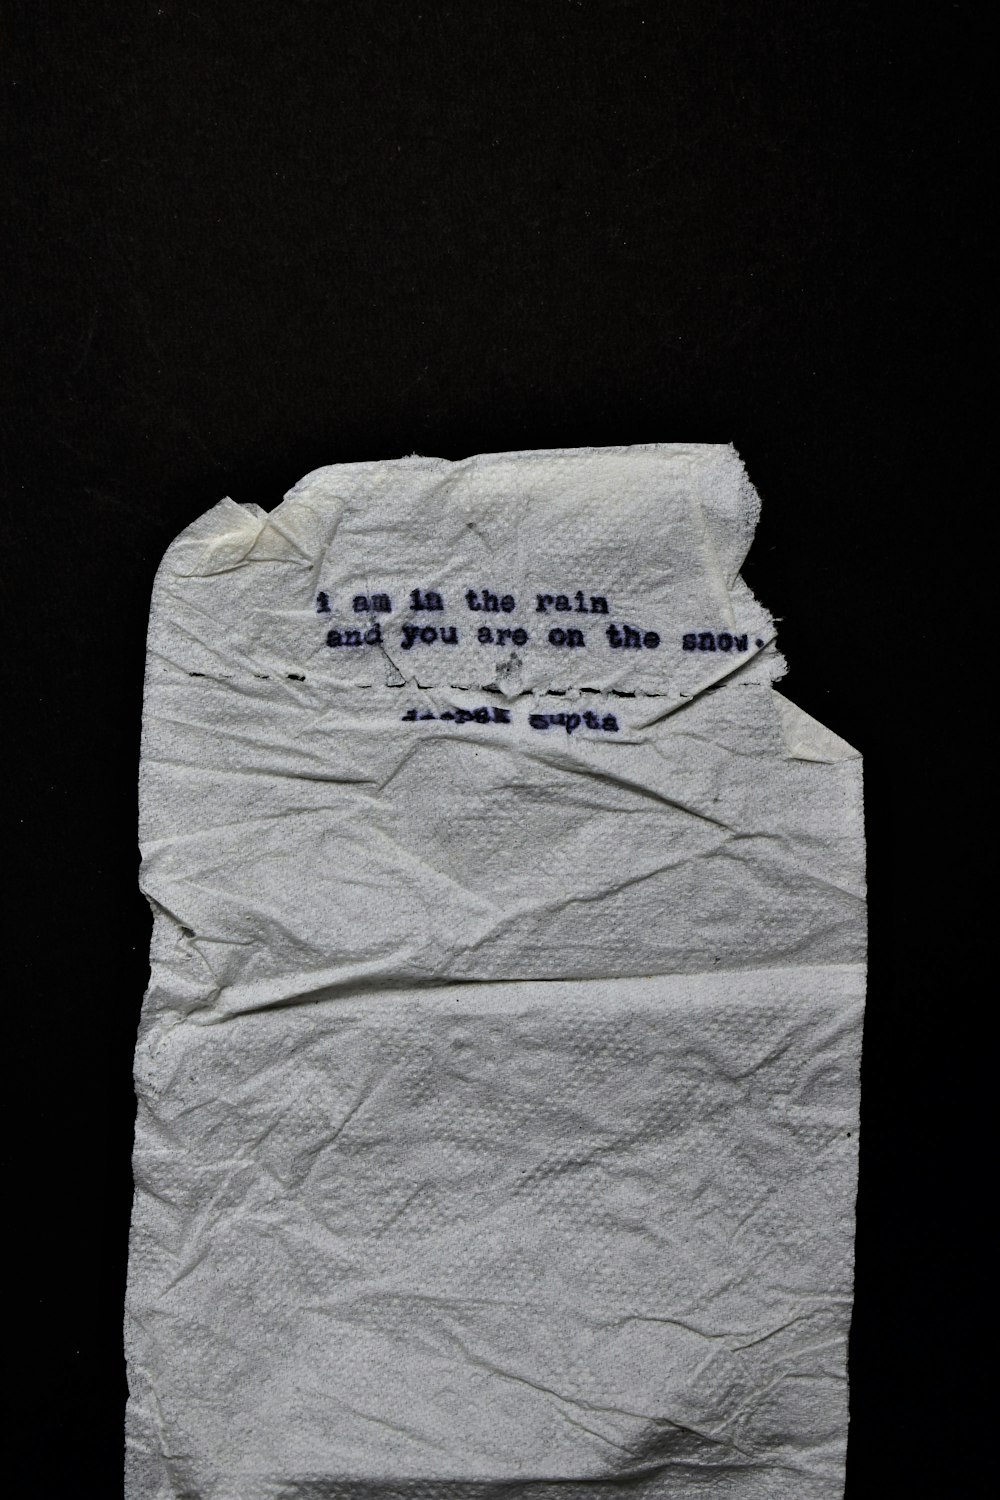 a piece of paper with a poem written on it